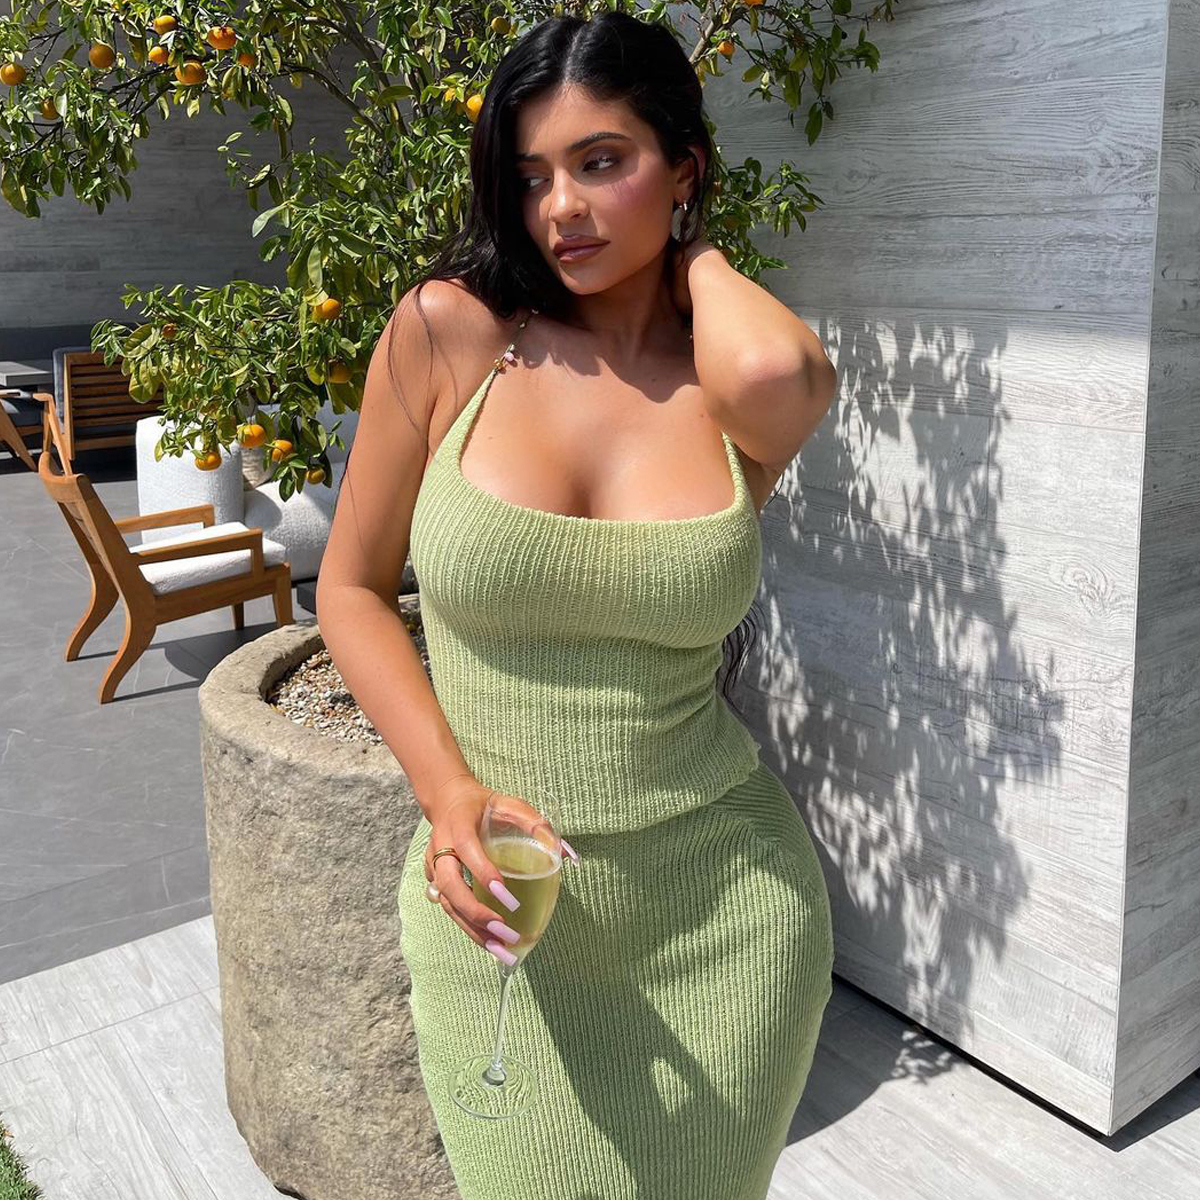 Kylie Jenner just teased a first look at her new fashion label